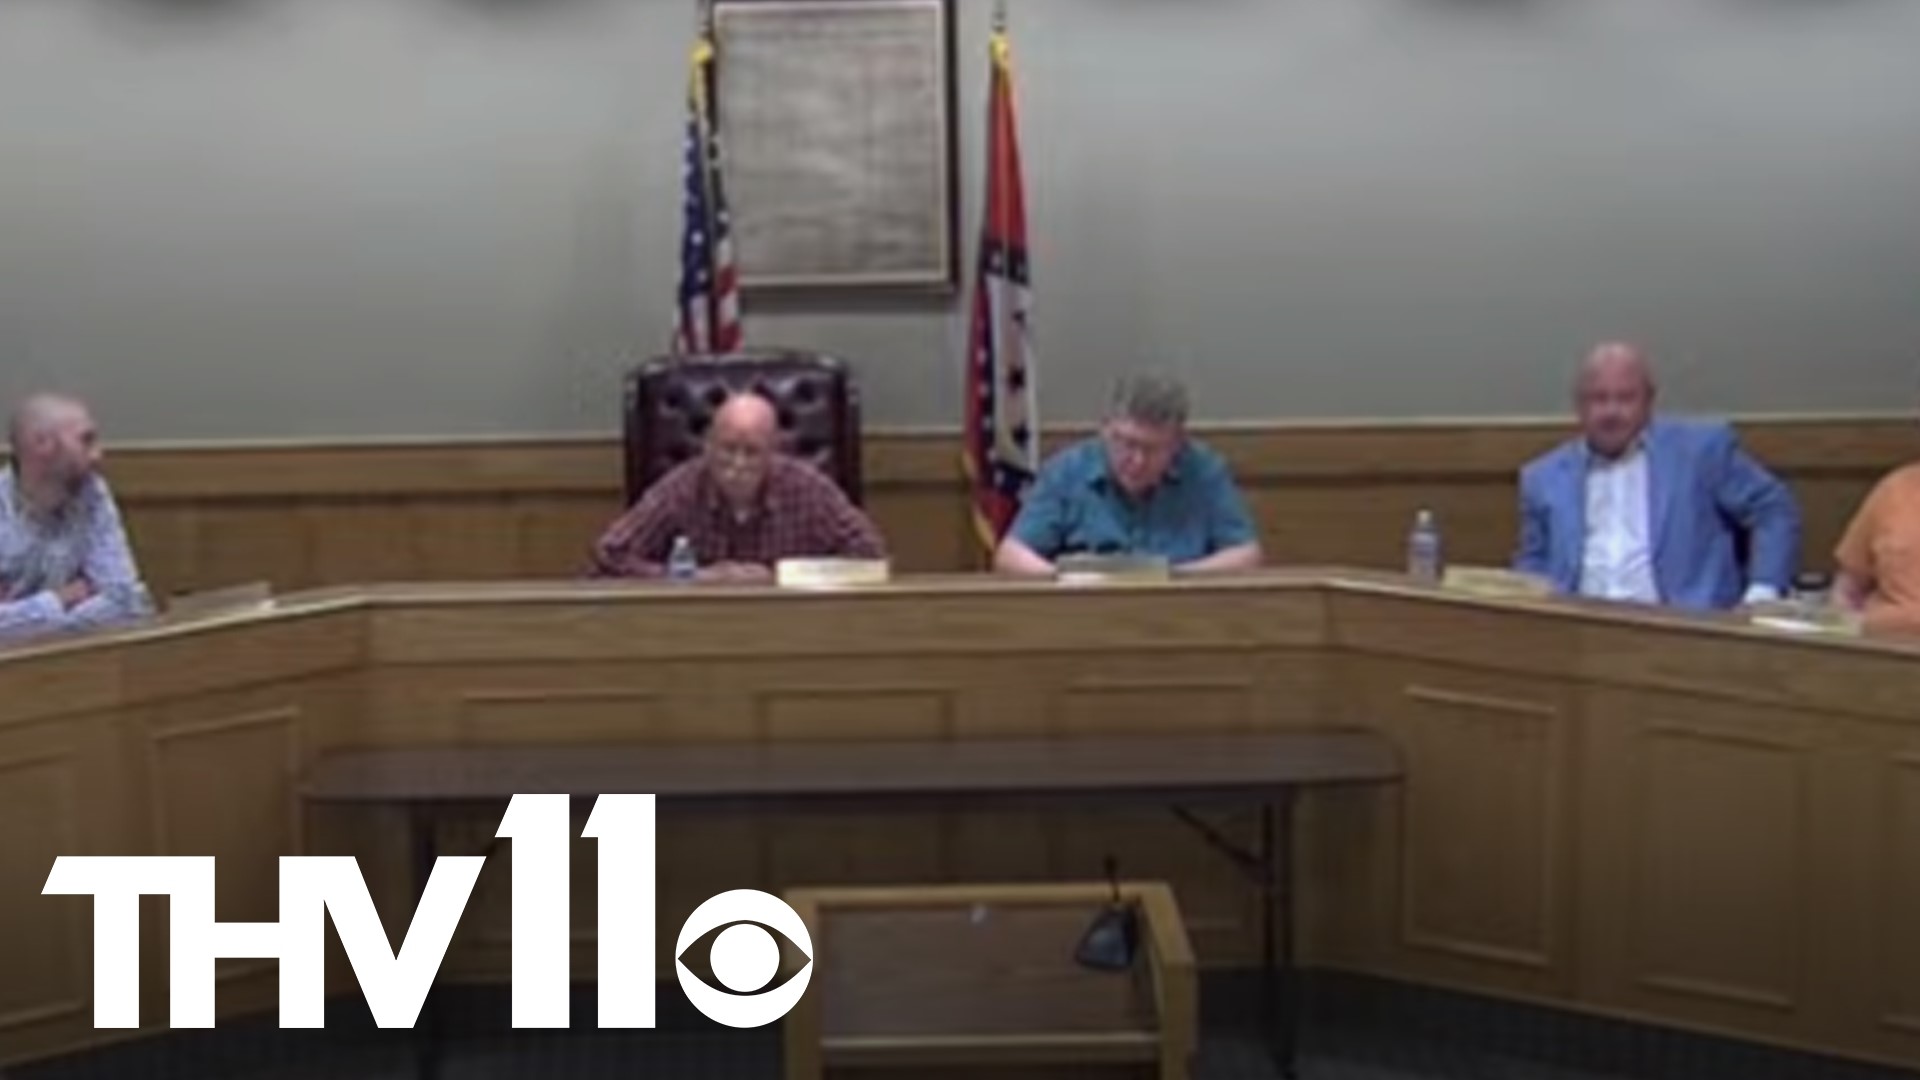 During a Bryant City Council Special Meeting held on Monday night, the board made a motion requesting Mayor Allen Scott's resignation.